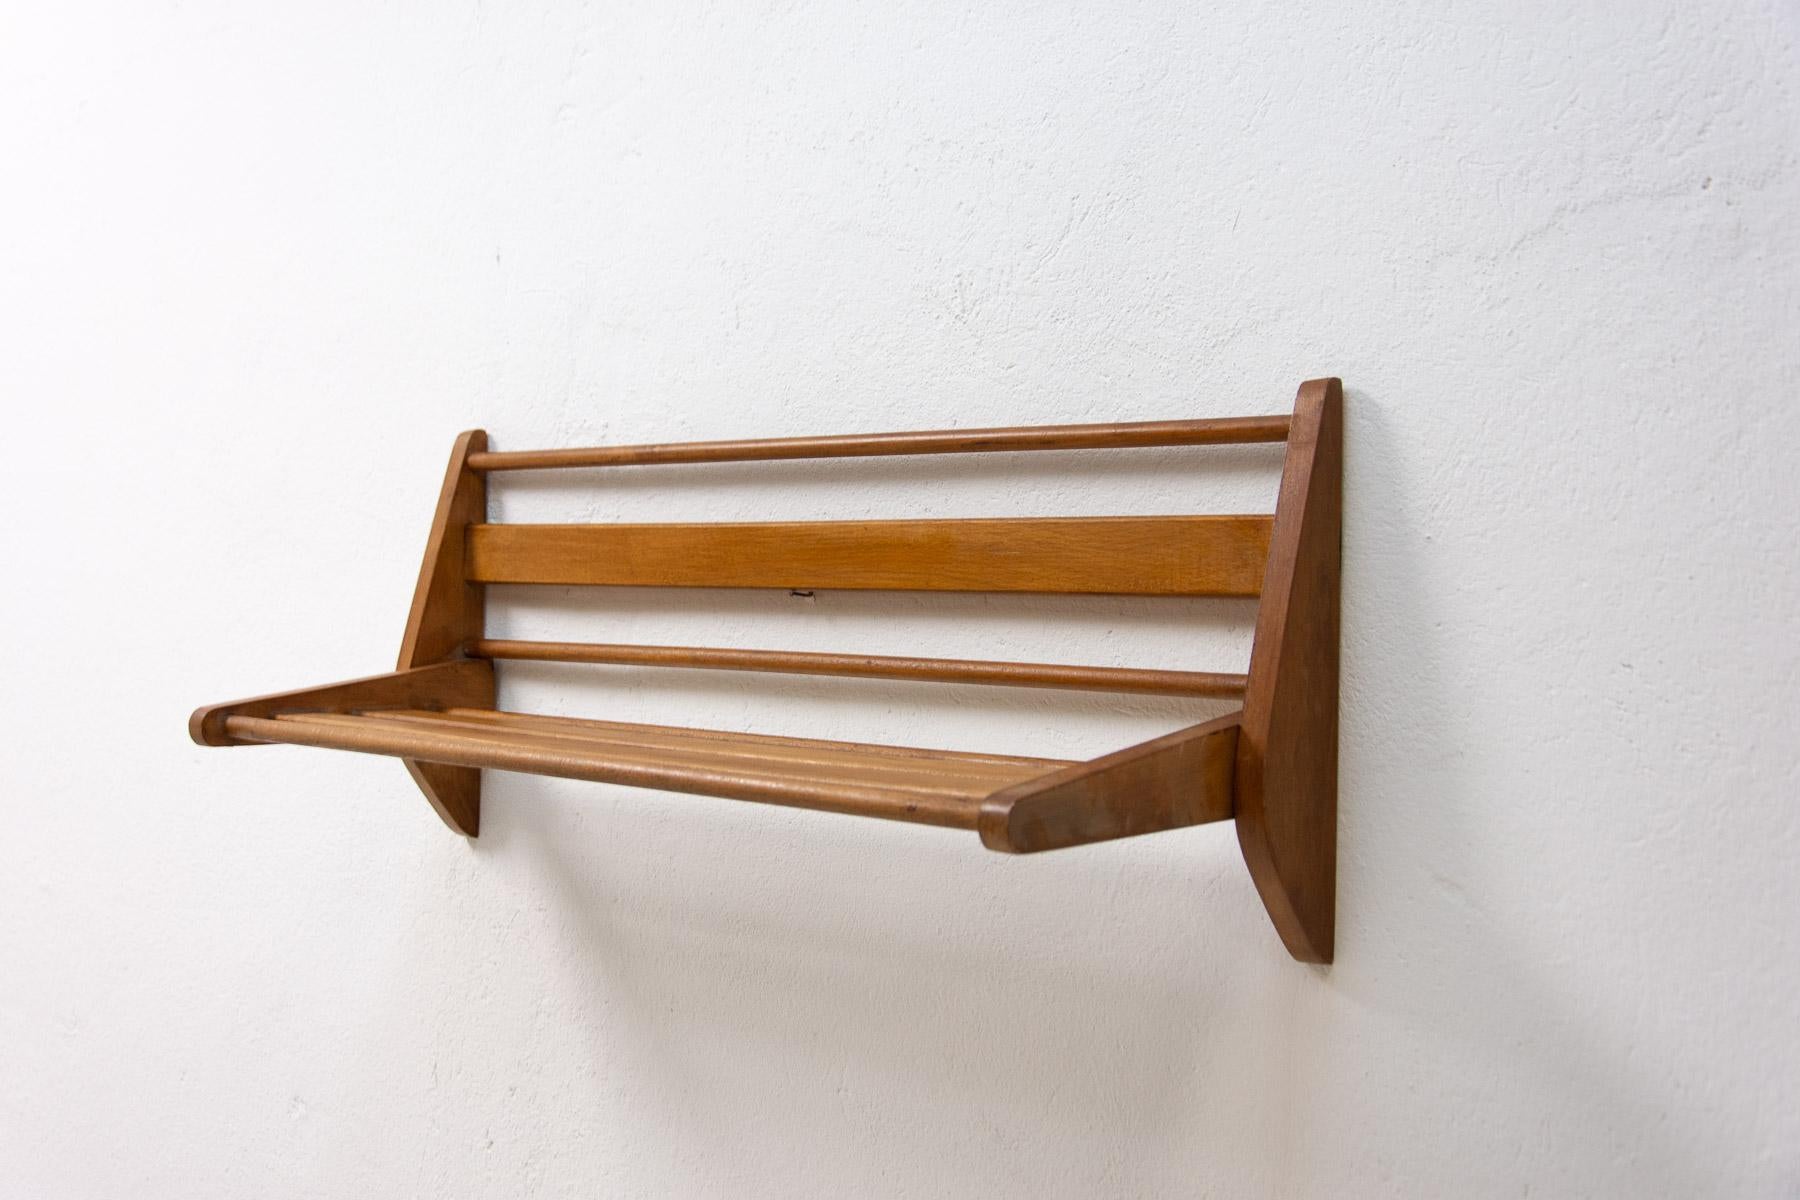 Mid century wooden shelf made by Krásná Jizba company in the former Czechoslovakia in the 1960´s.
It´s made of beech wood.
In very good Vintage condition, shows signs of age and using.

 

Measures: Height: 30 cm

width: 74 cm

depth: 24